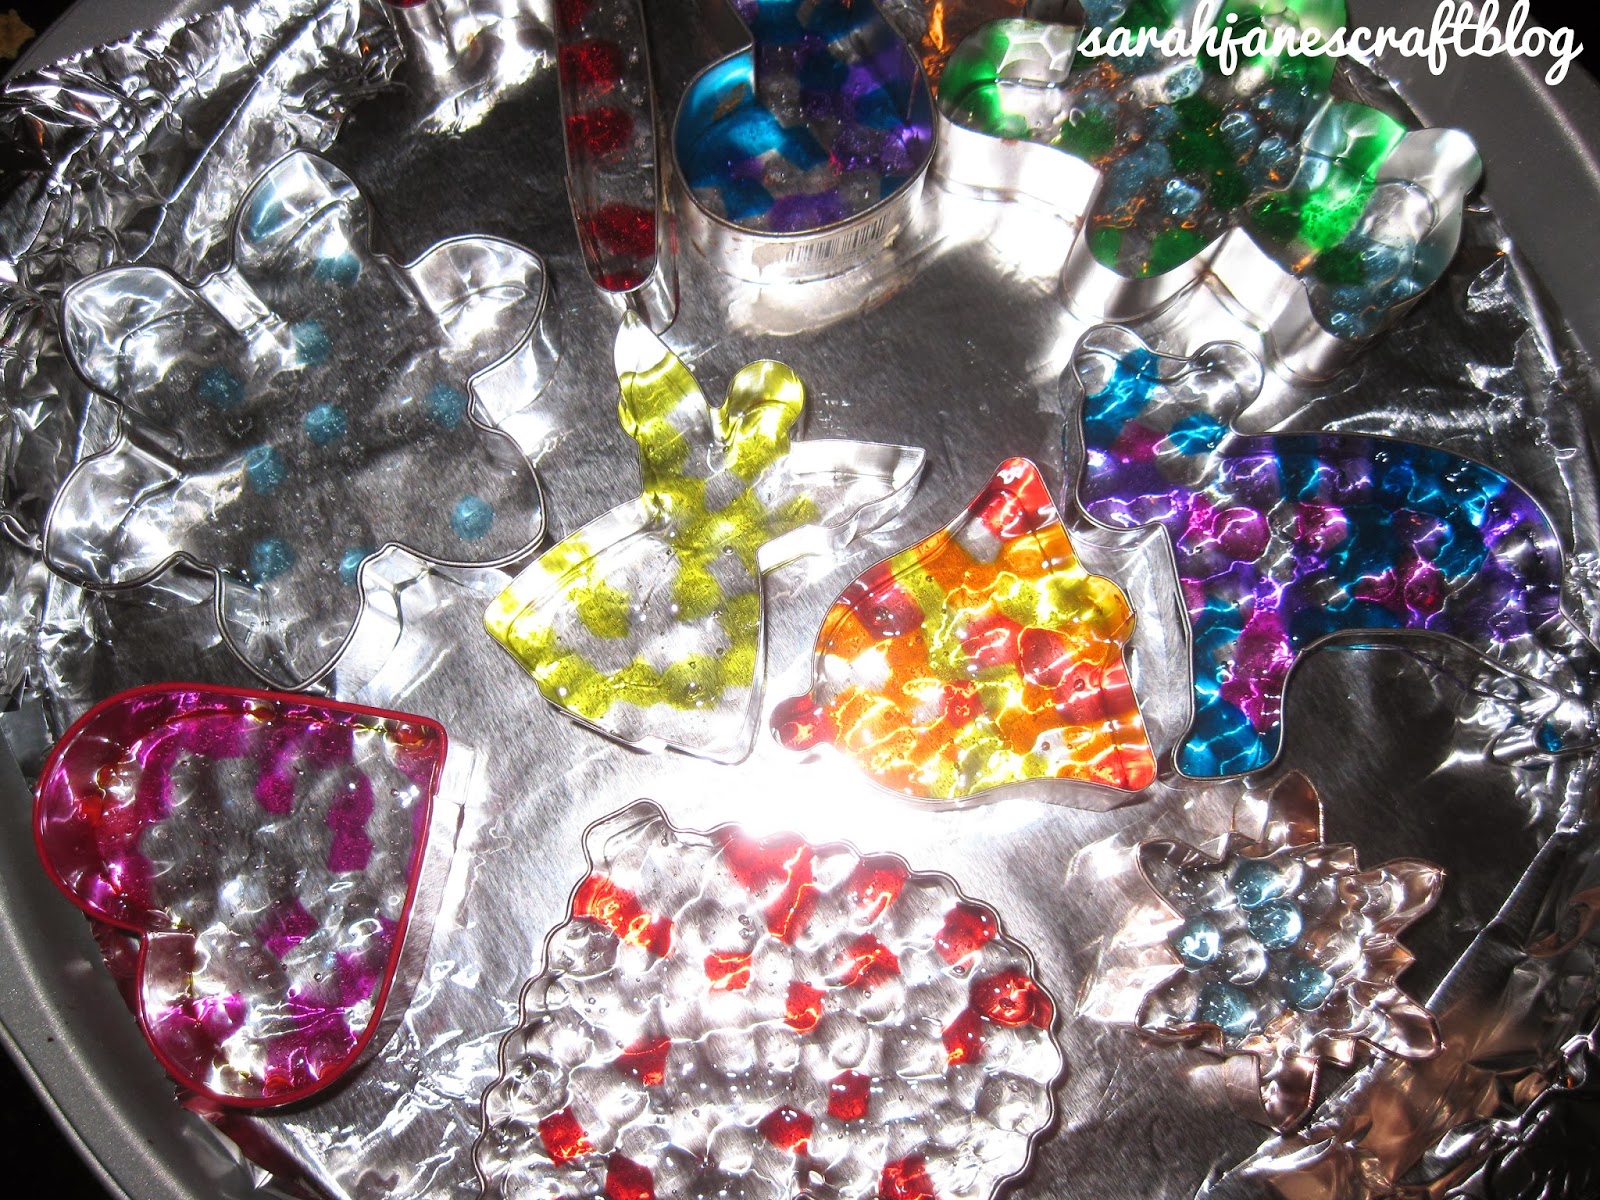 melted pony beads - great link!  Melted bead crafts, Pony bead